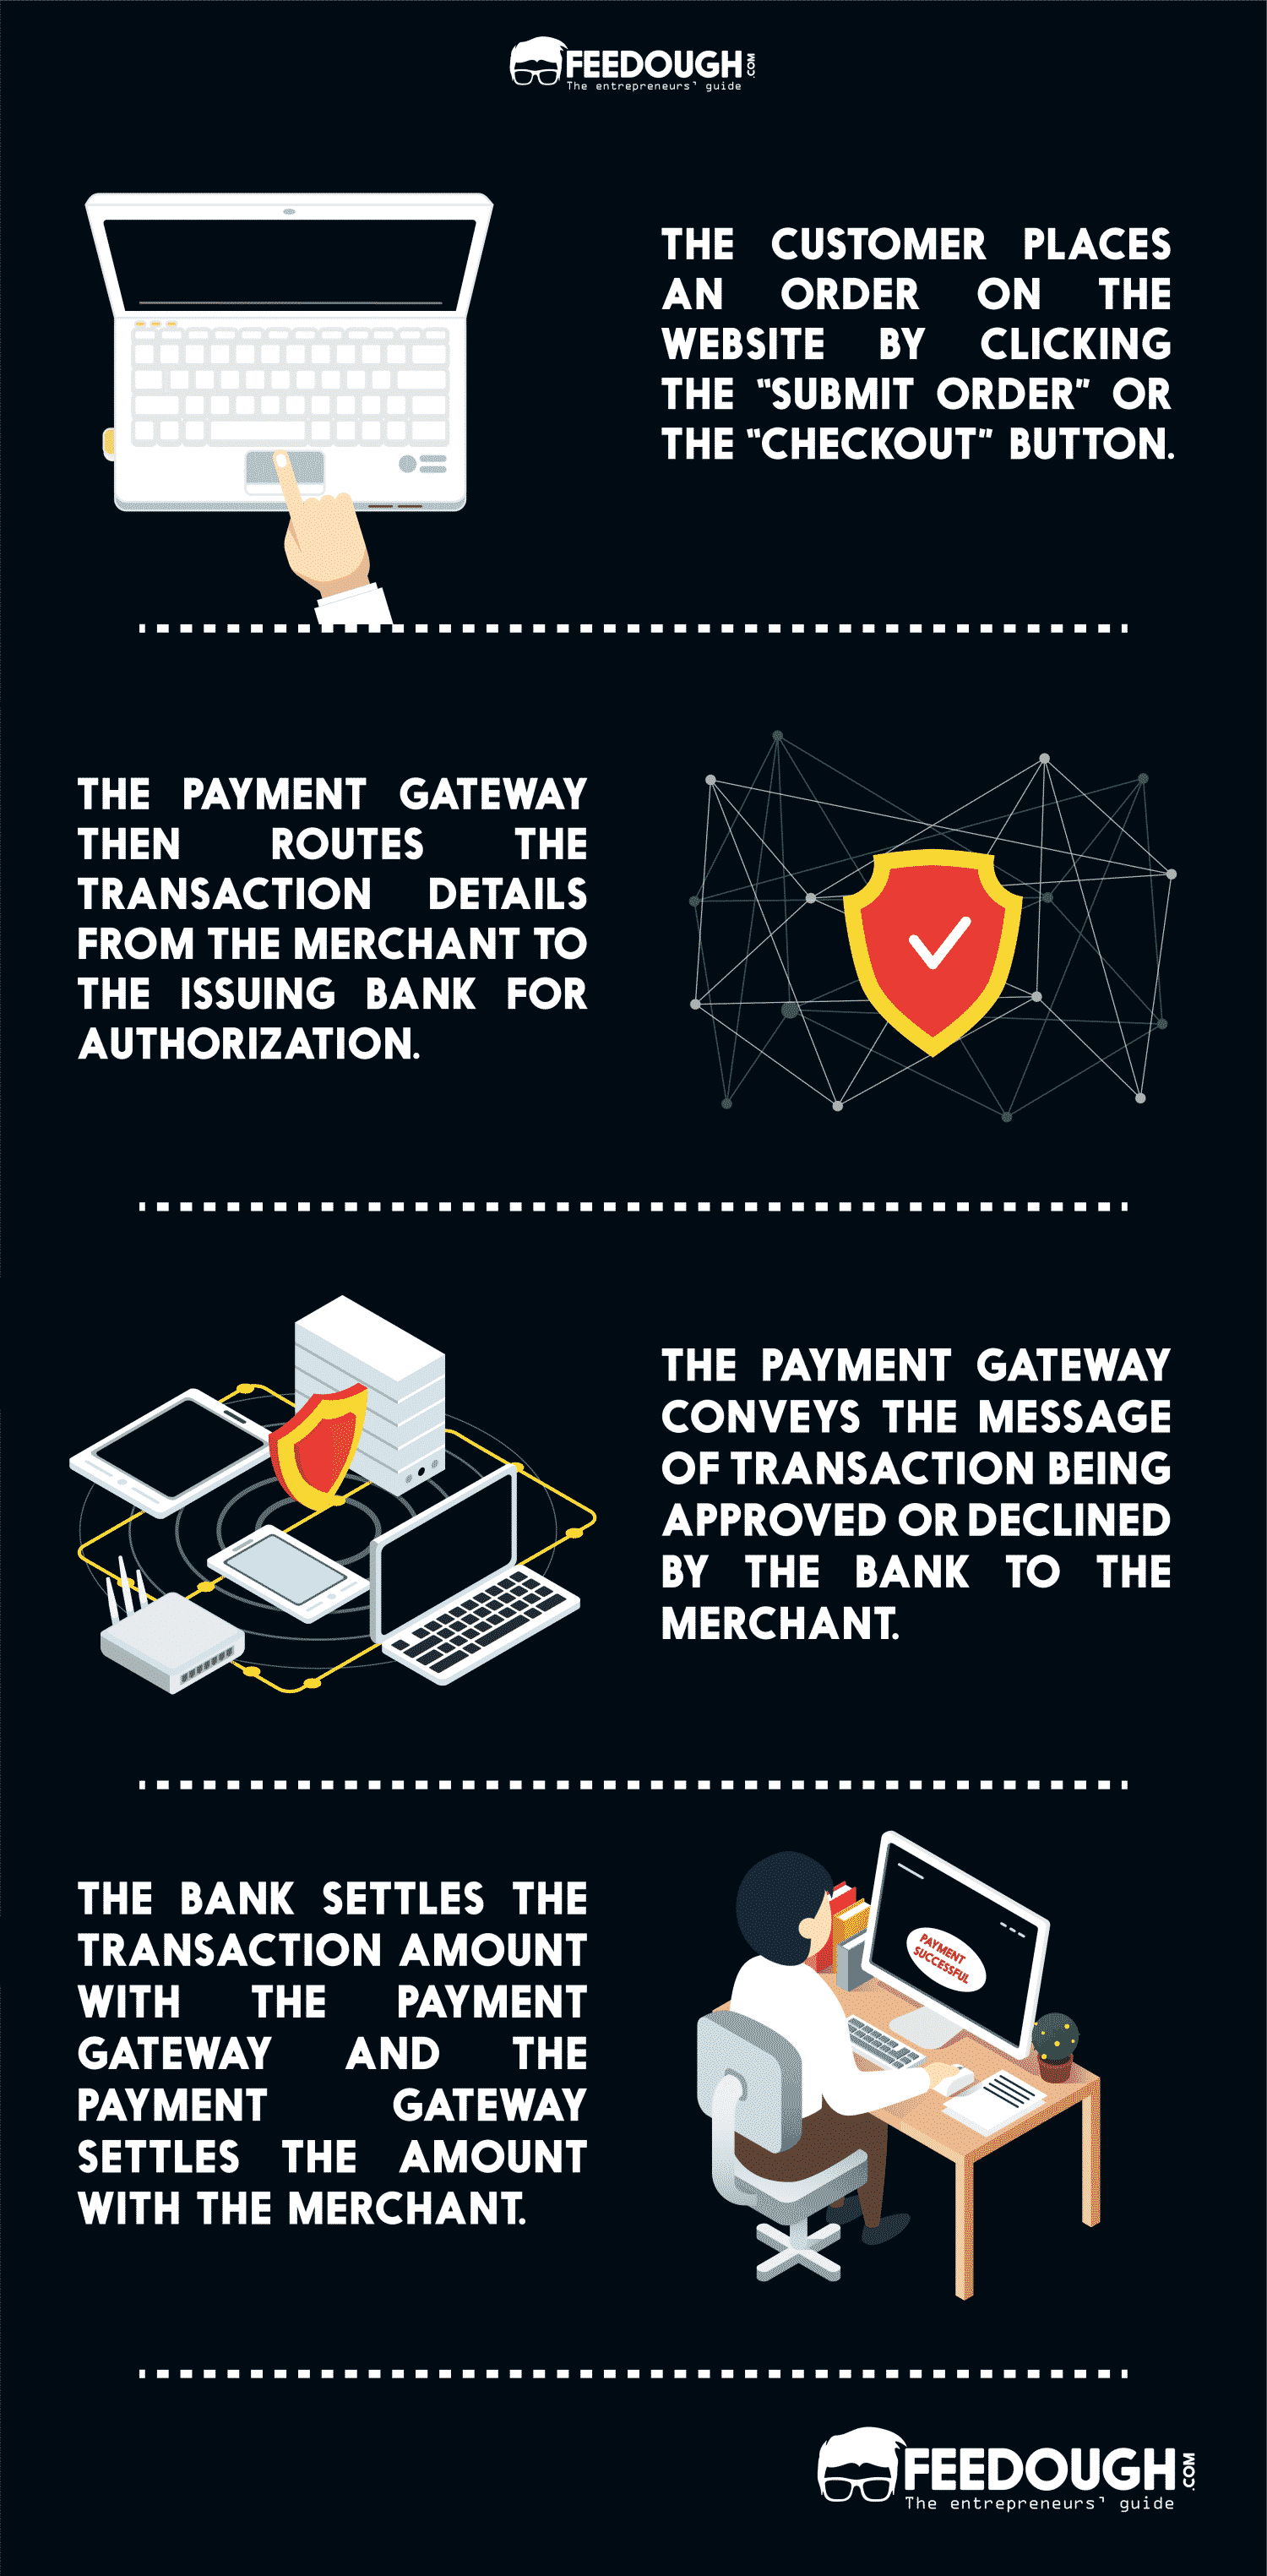 PAYMENT GATEWAY BUSINESS MODEL HOW PAYMENT GATEWAY WORKS